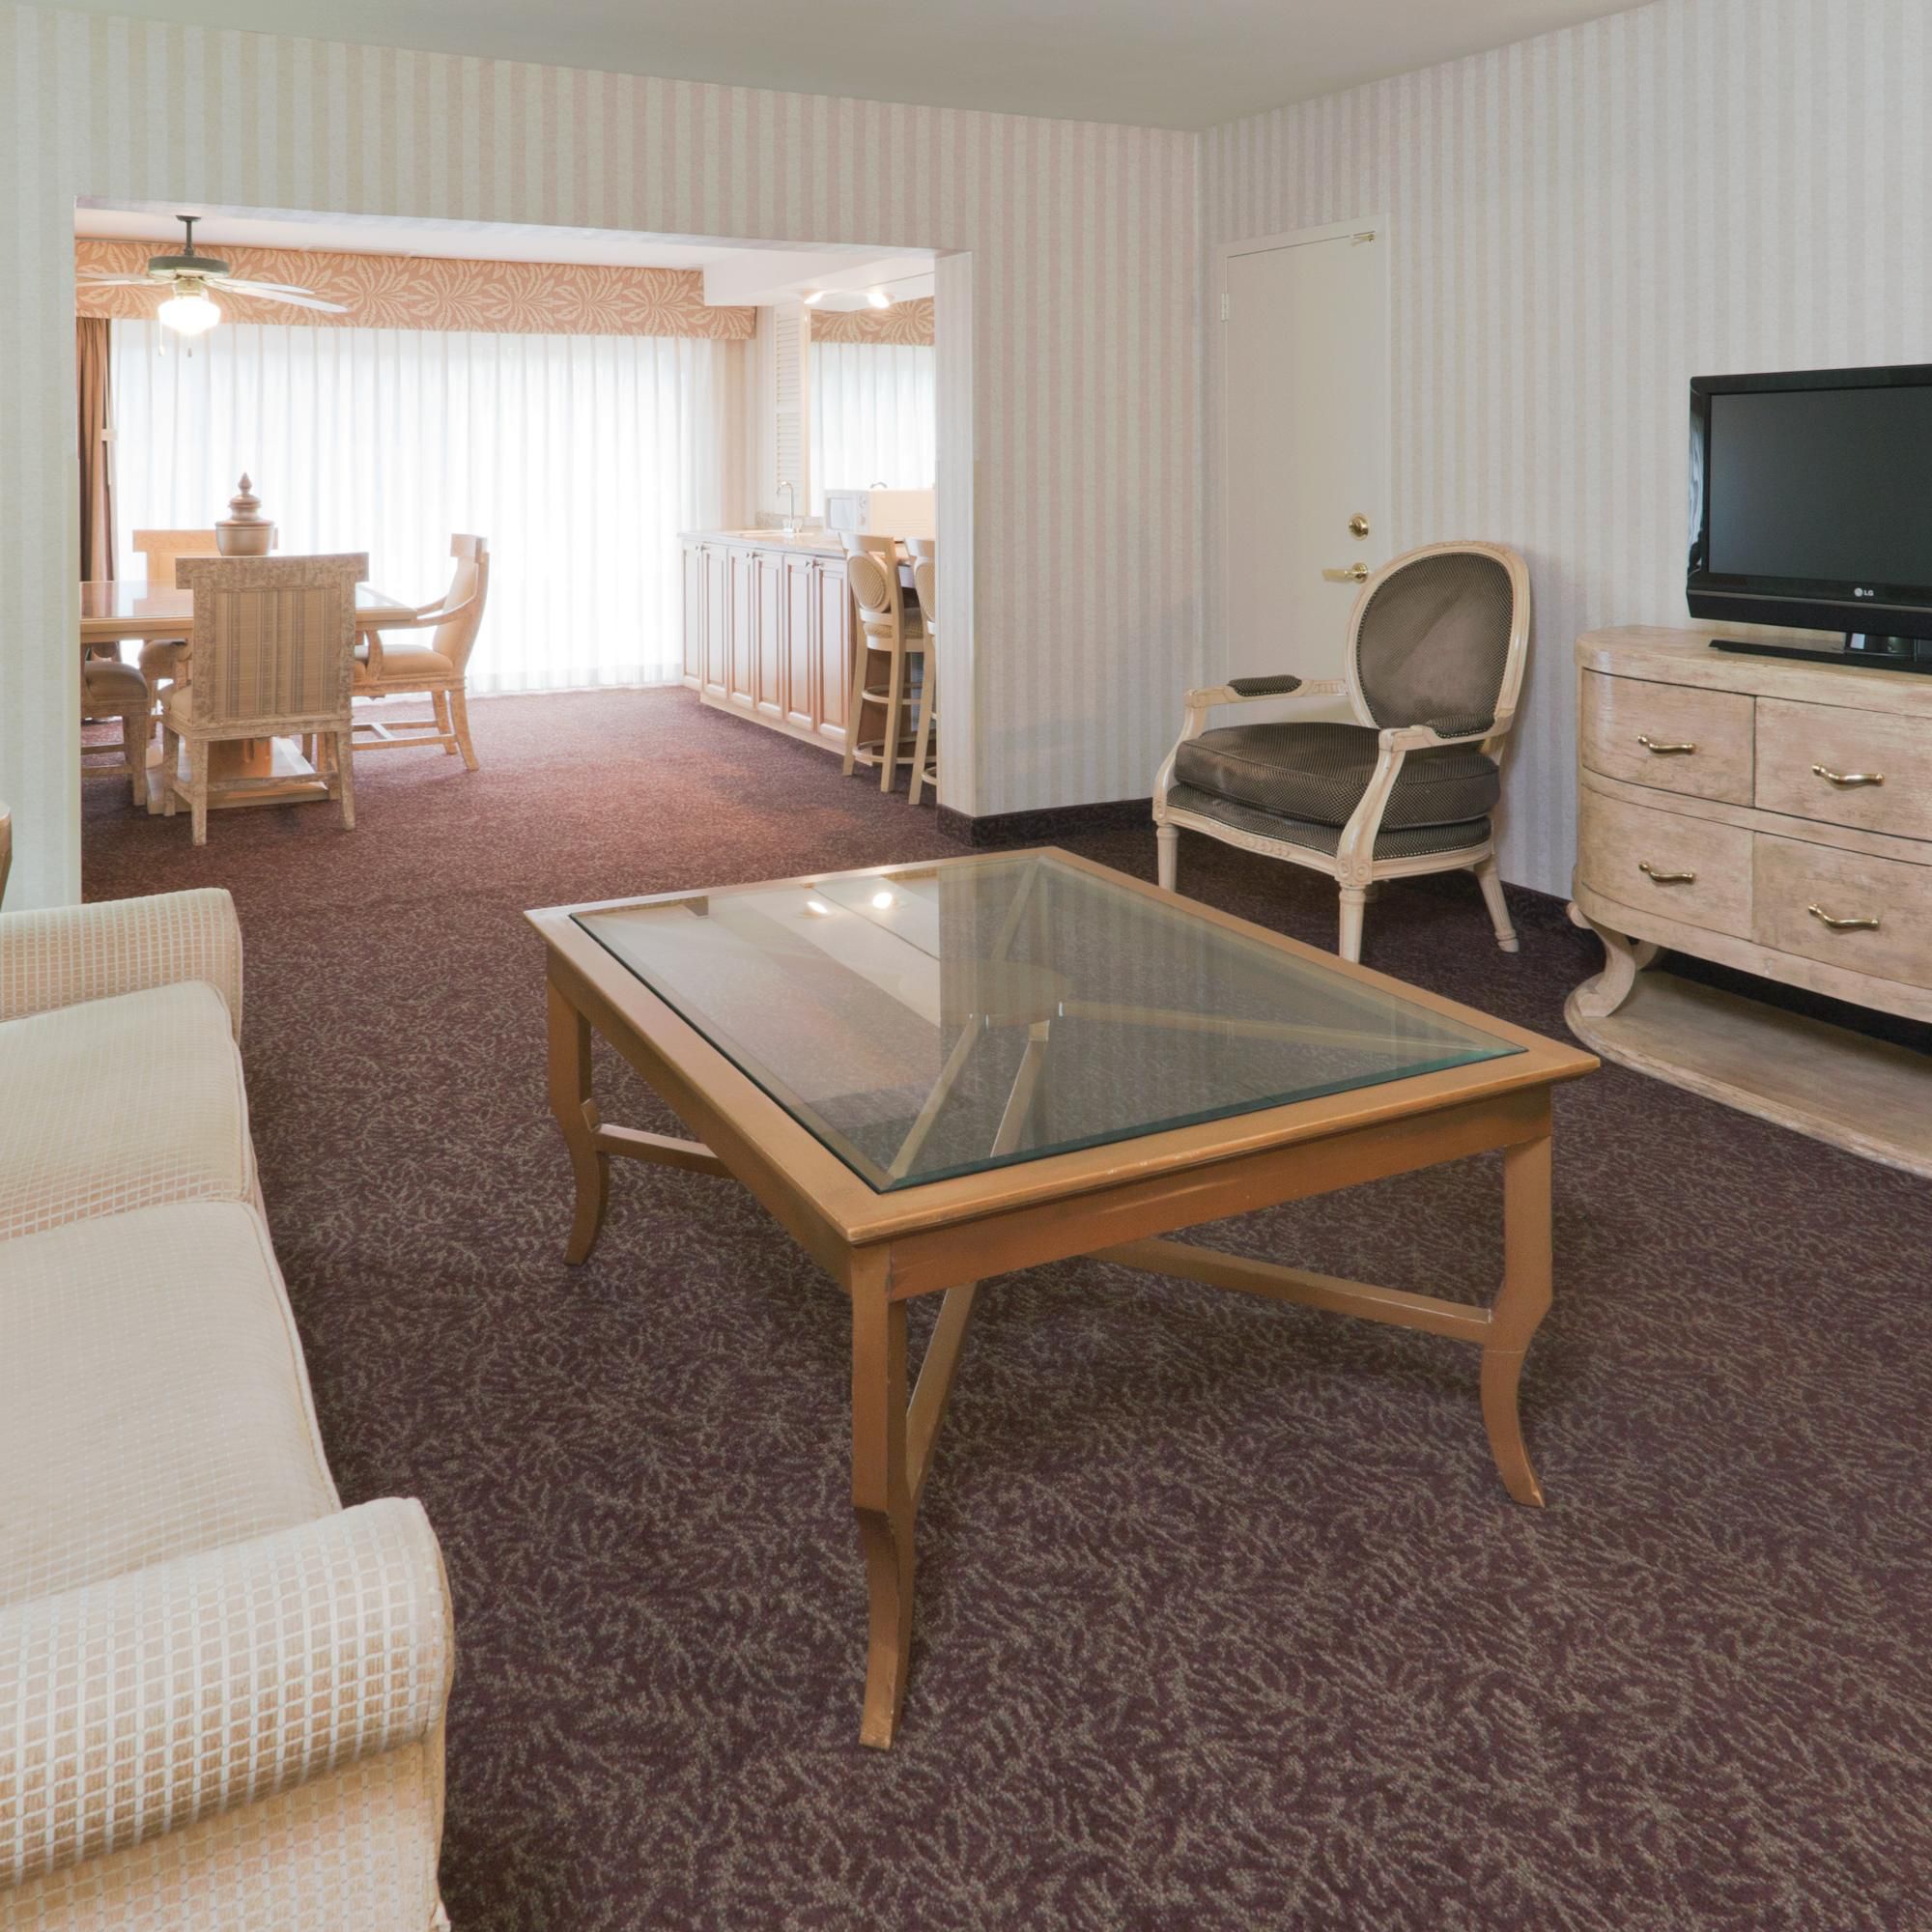 Our Lanai Suites are fantastic gathering places for families!